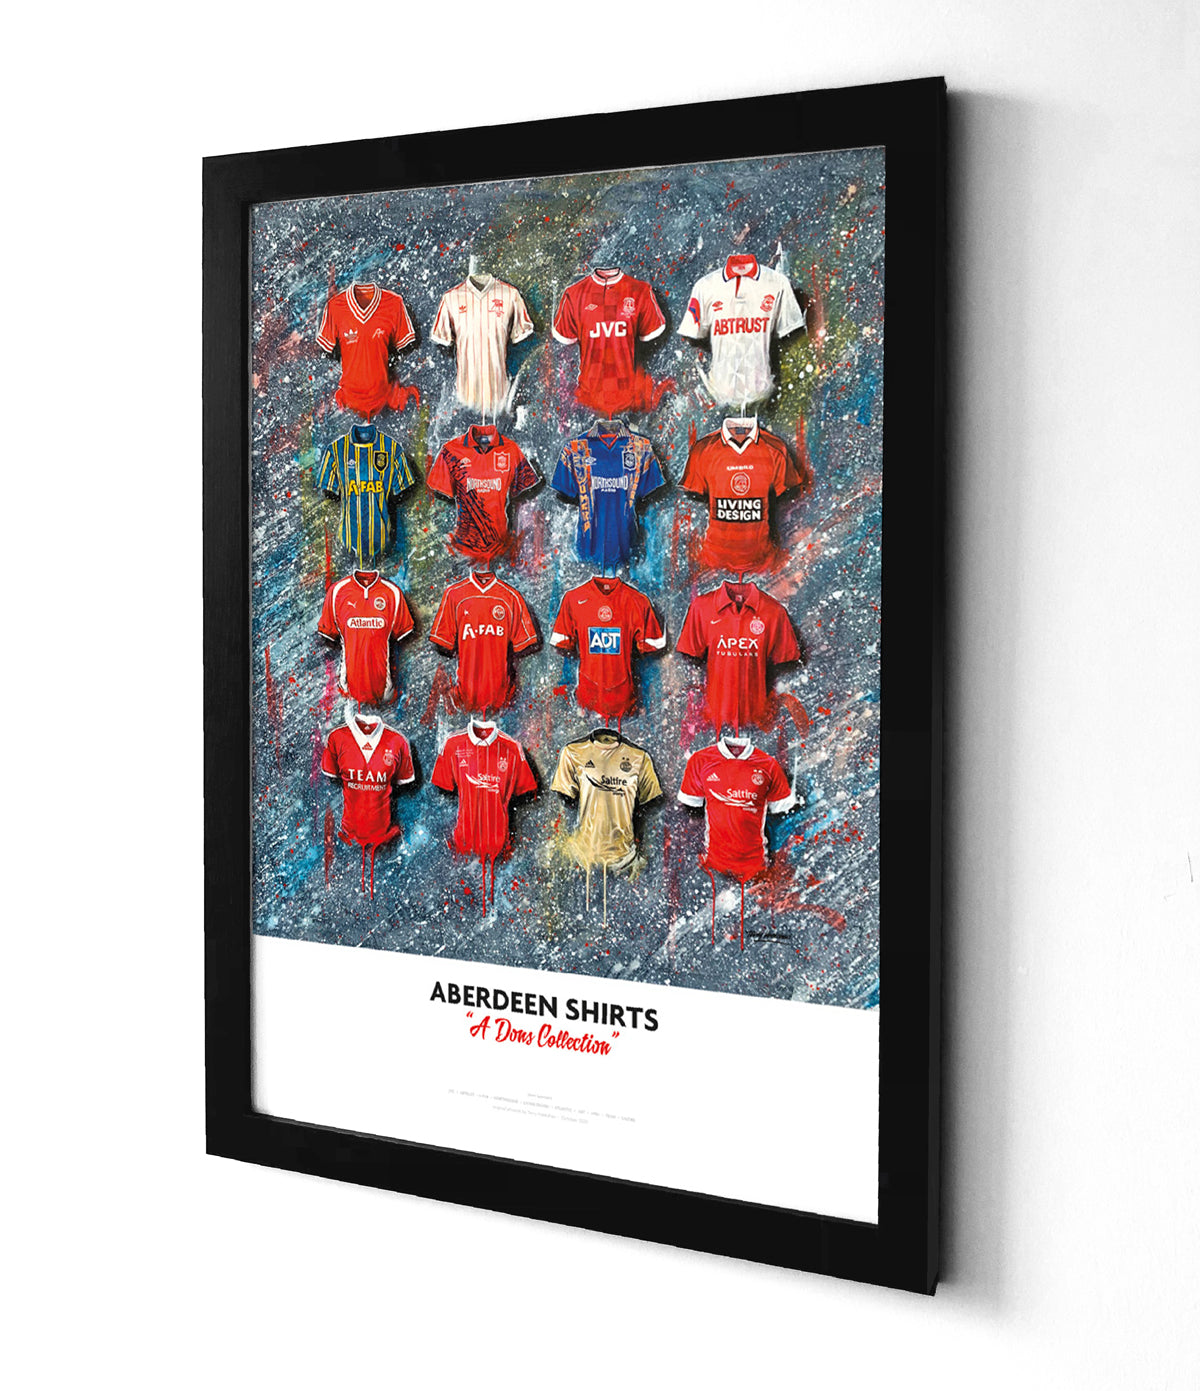 Aberdeen Shirts Football Art Framed Print. Artwork by Terry Kneeshaw depicting a collection of twenty iconic Aberdeen home and away jerseys, selected by the fans. The kits are predominantly red or white with black and gold accents and feature the Aberdeen crest, kit manufacturer, and shirt sponsor logos on the front. The artwork is a high-quality print of a hand-painted original, which uses textured brushstrokes to create a dynamic effect.